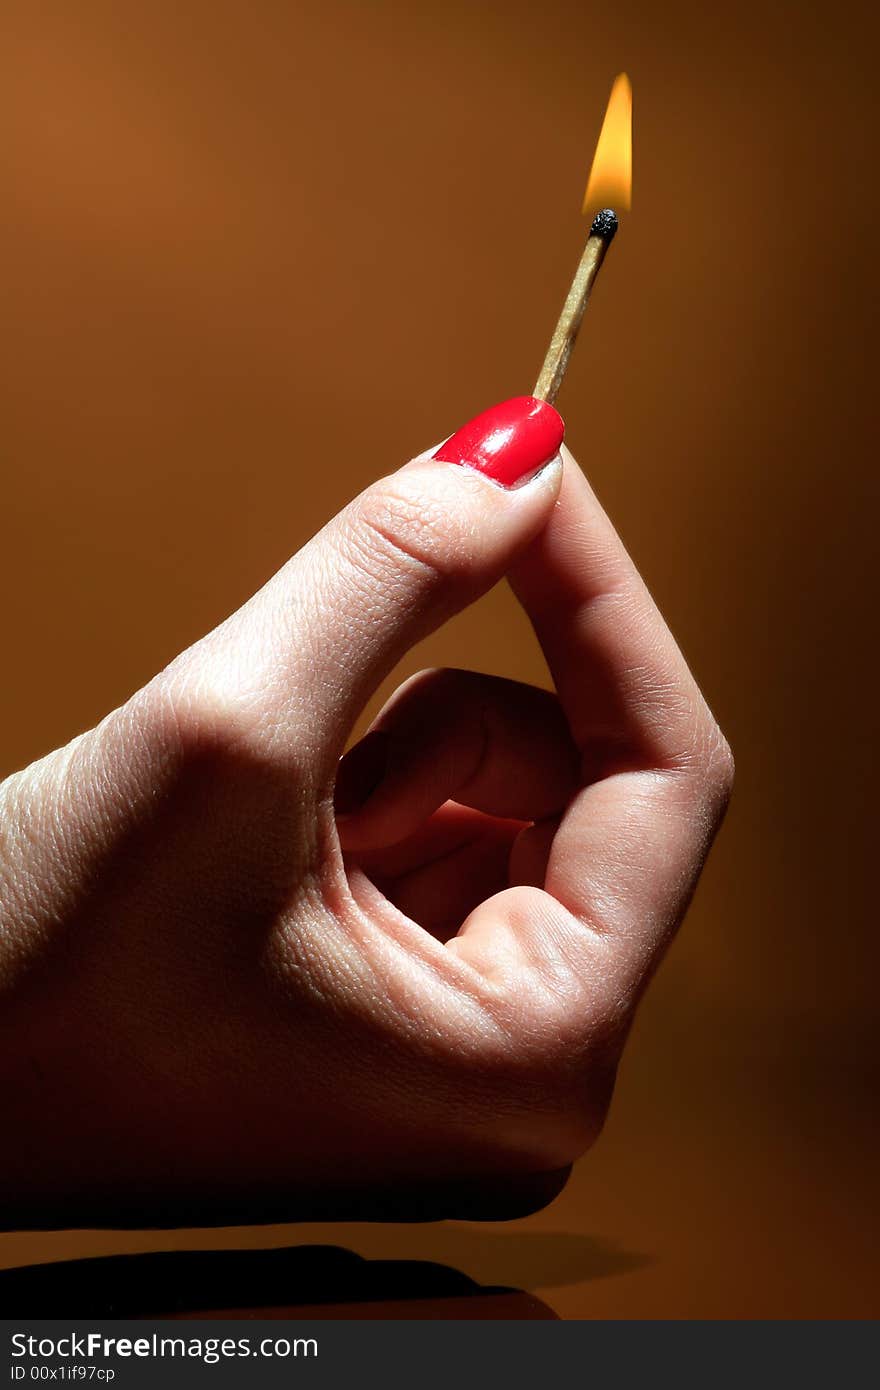 A female hand is holding a burning matches